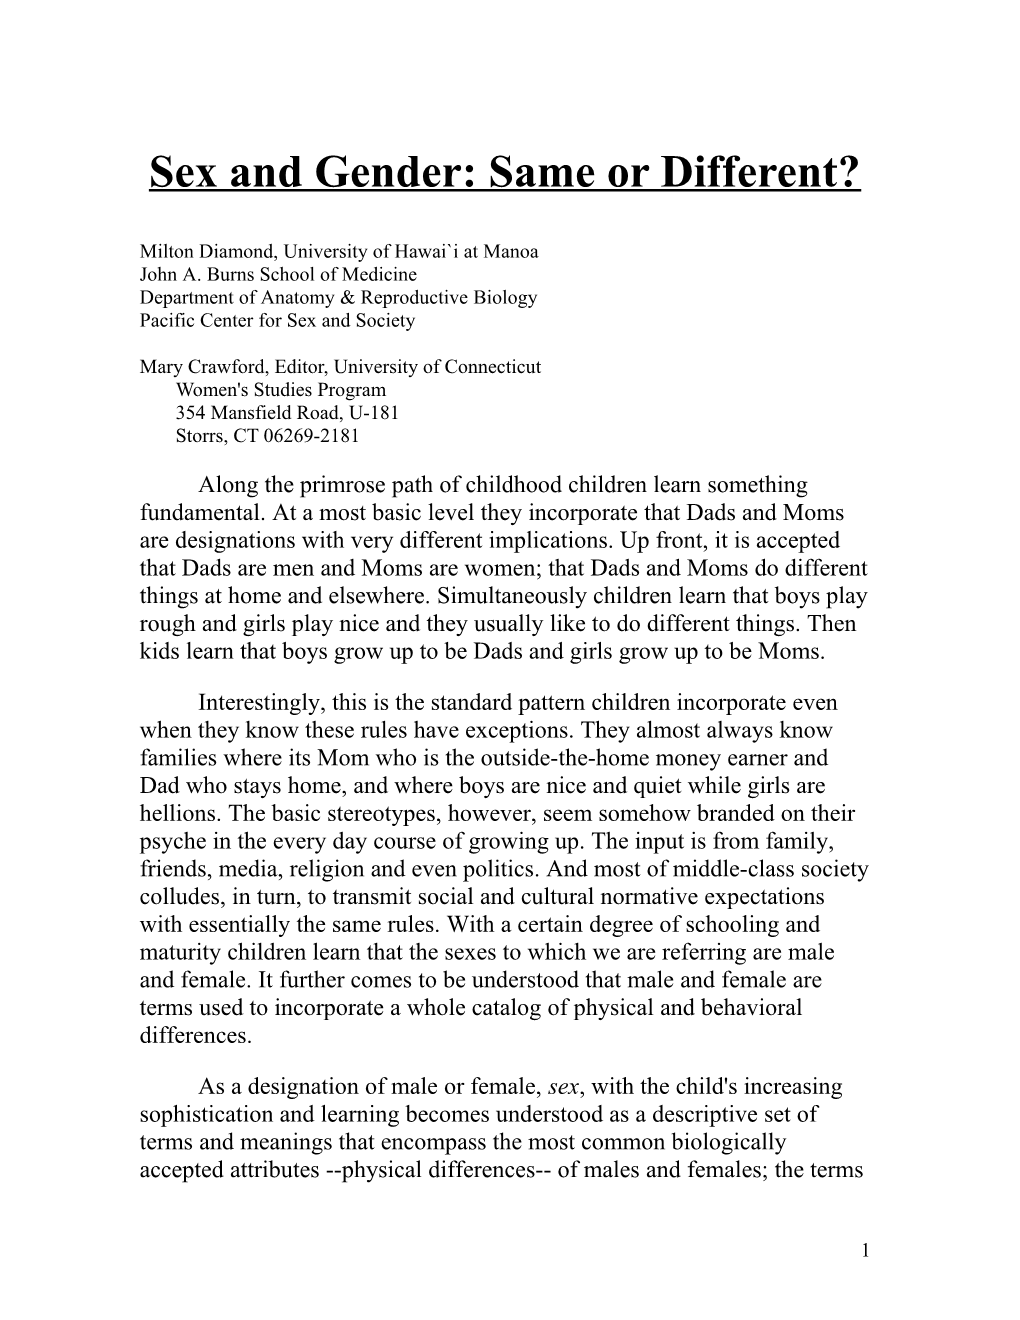 Sex and Gender: Same Or Different